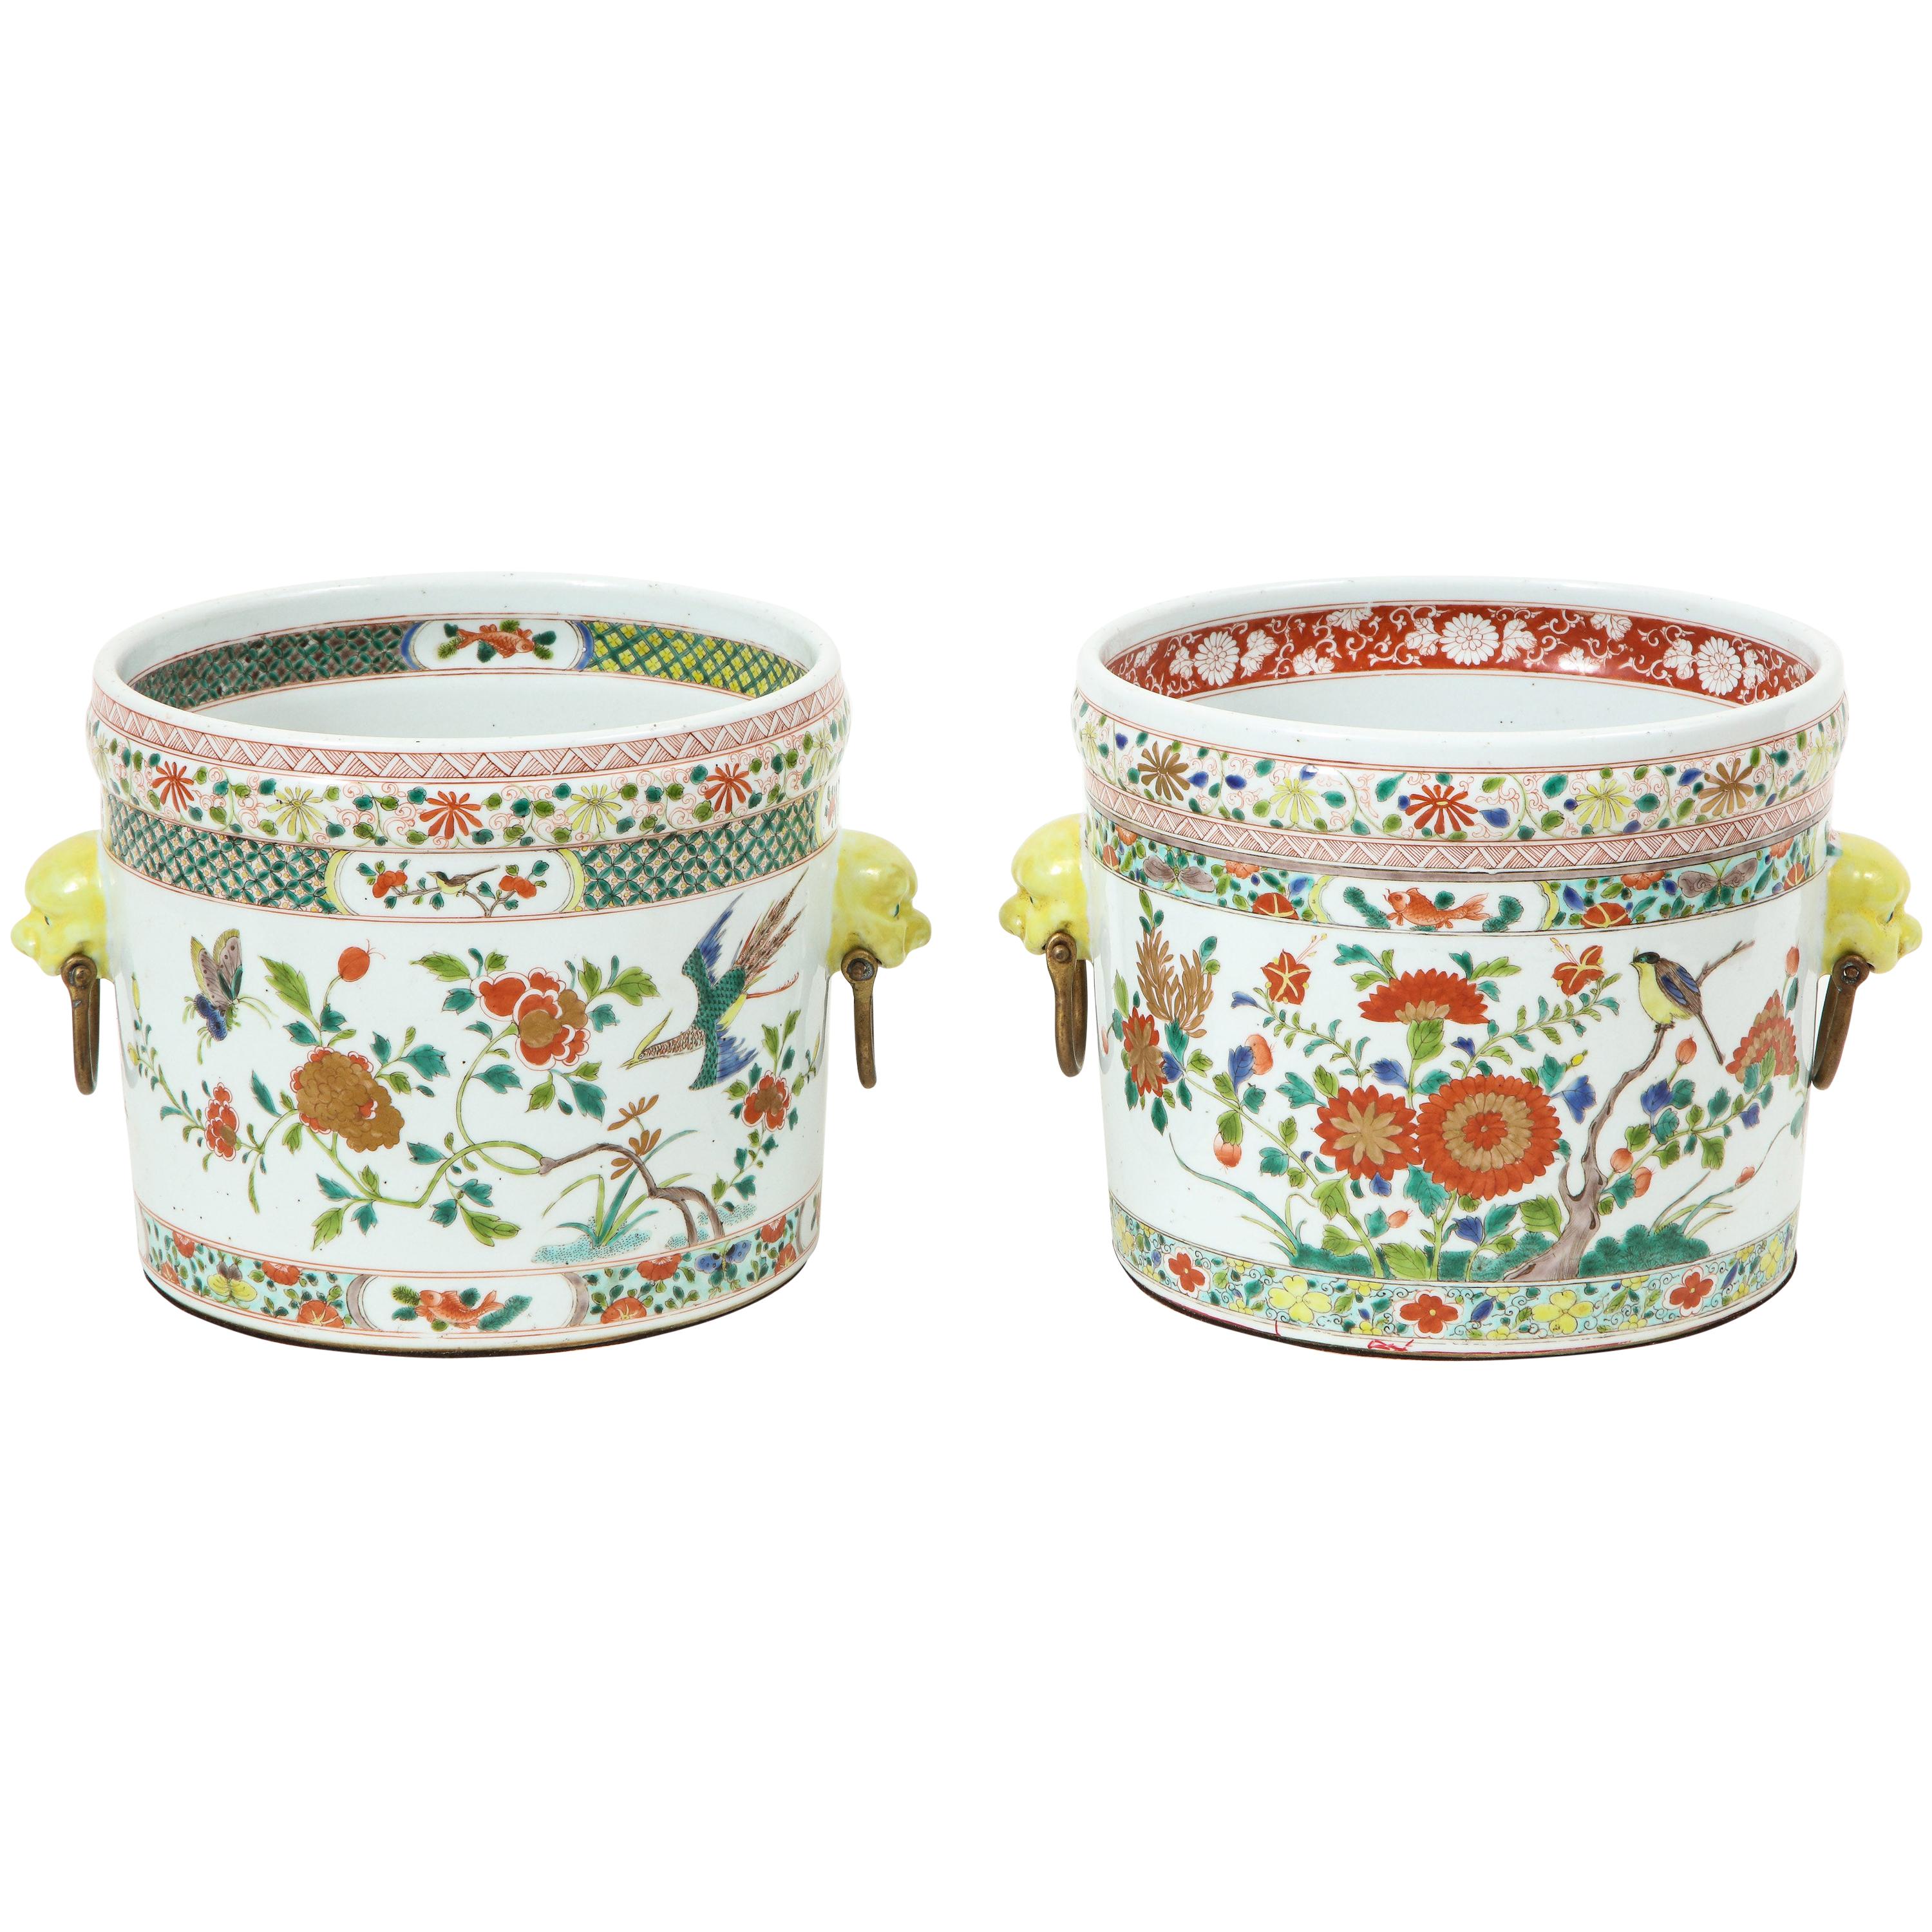 Near Pair of Chinese Porcelain Famille Verte Cachepots